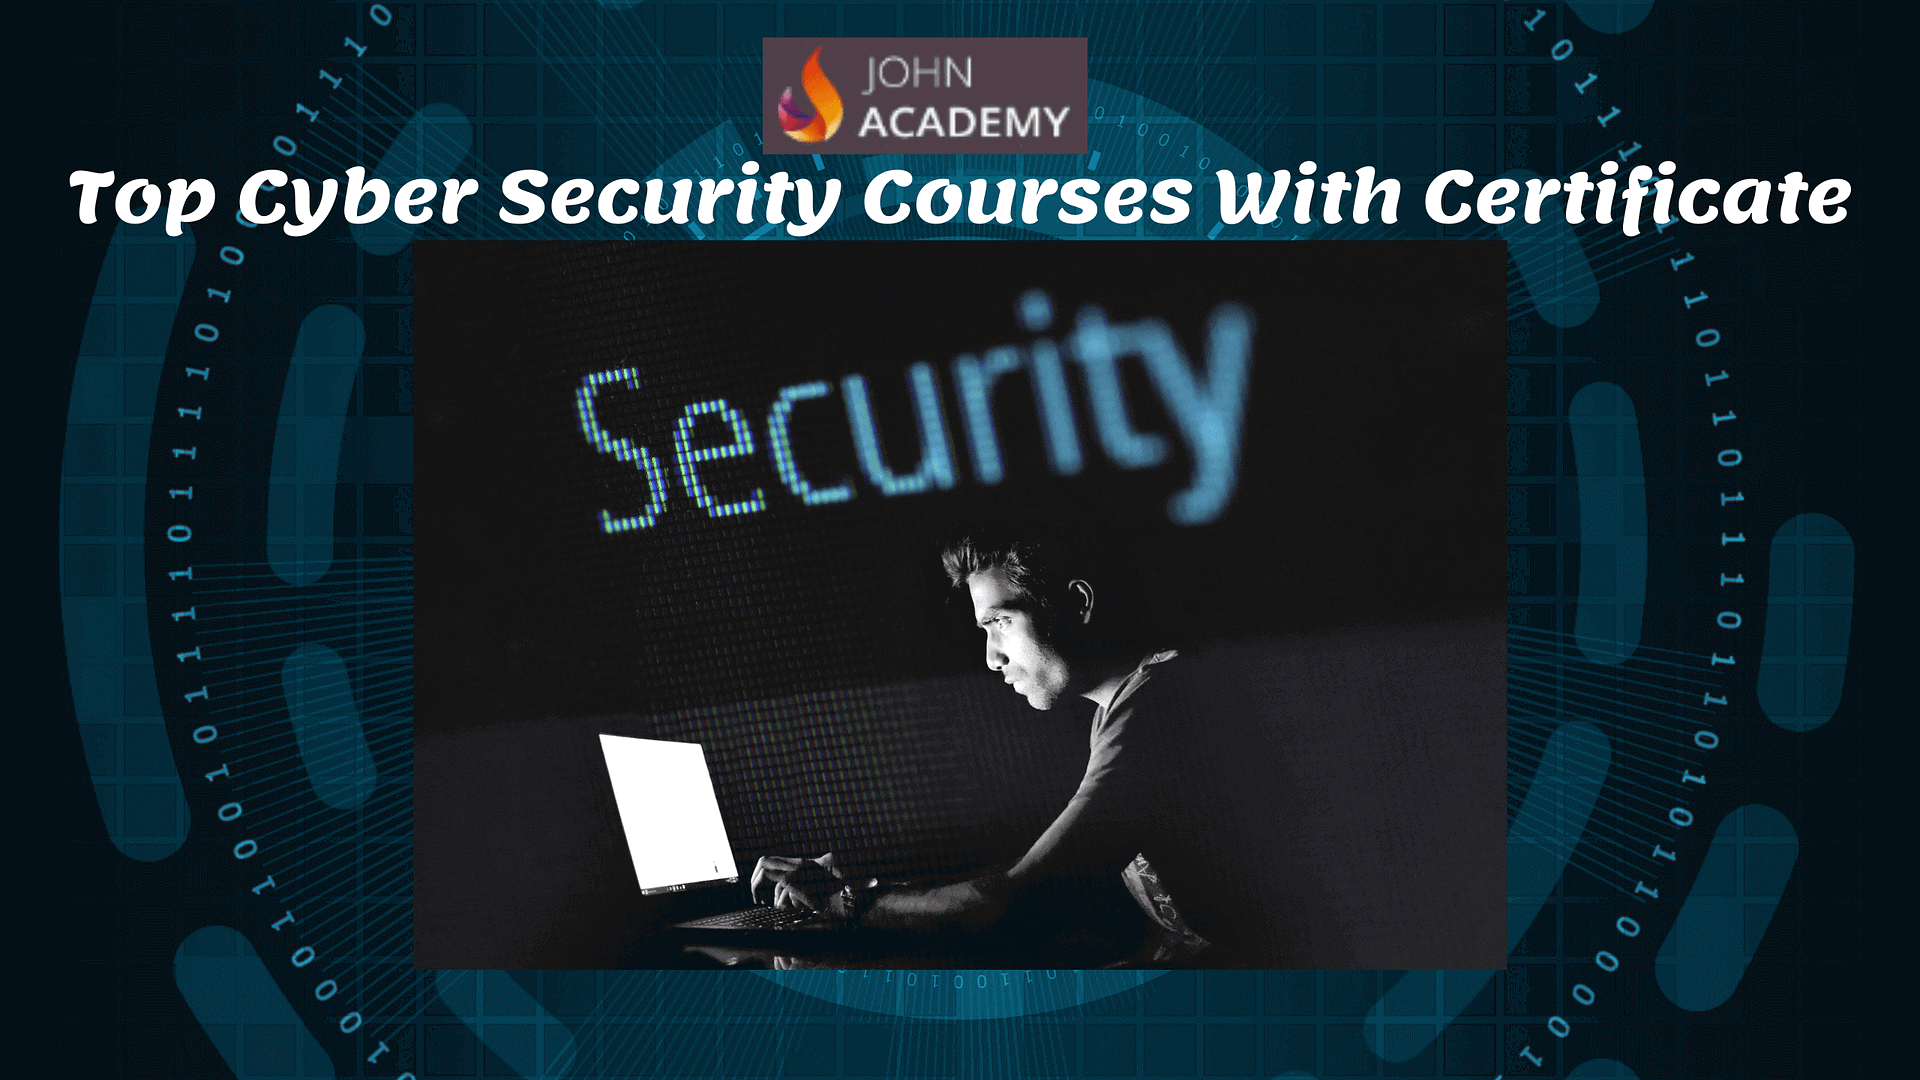 Top 24 Cyber Security Courses With Certificate